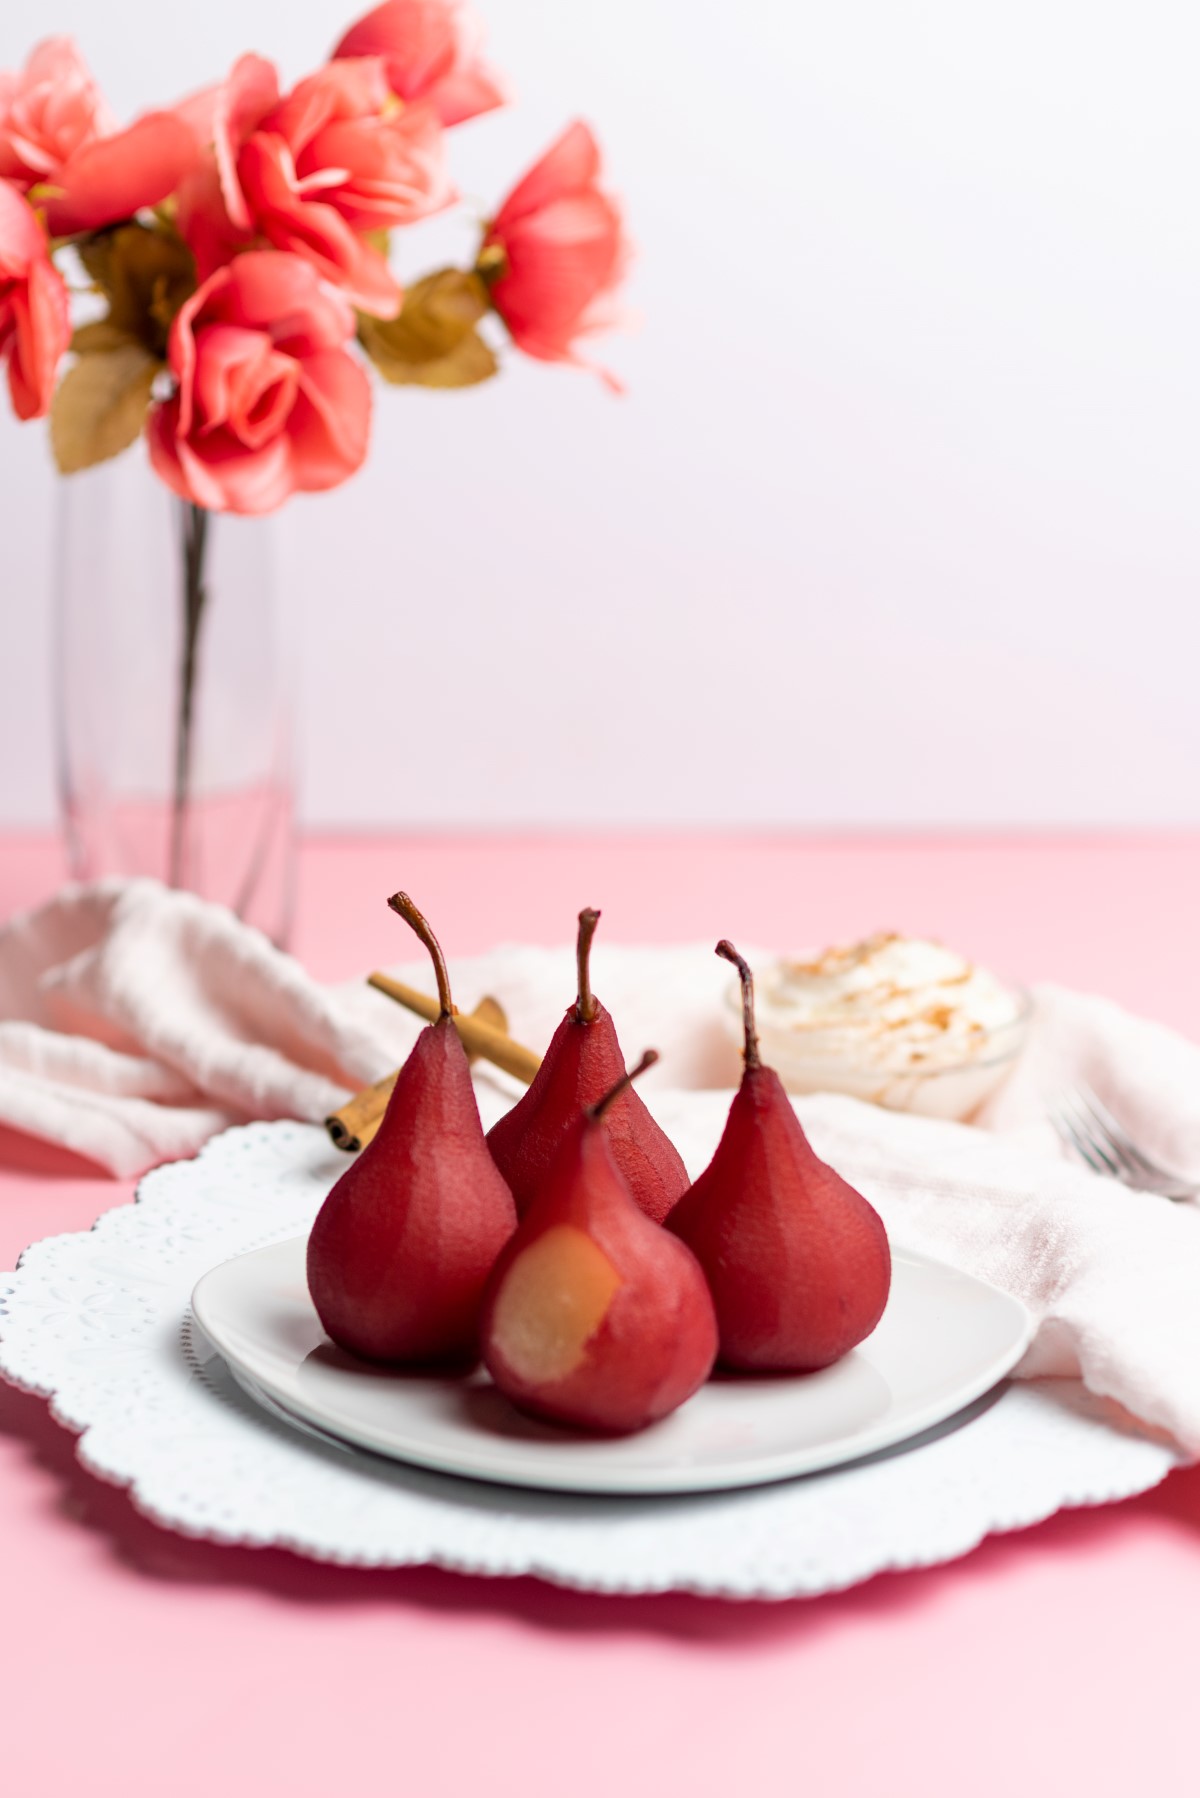 Red wine poached pears on a white plate.